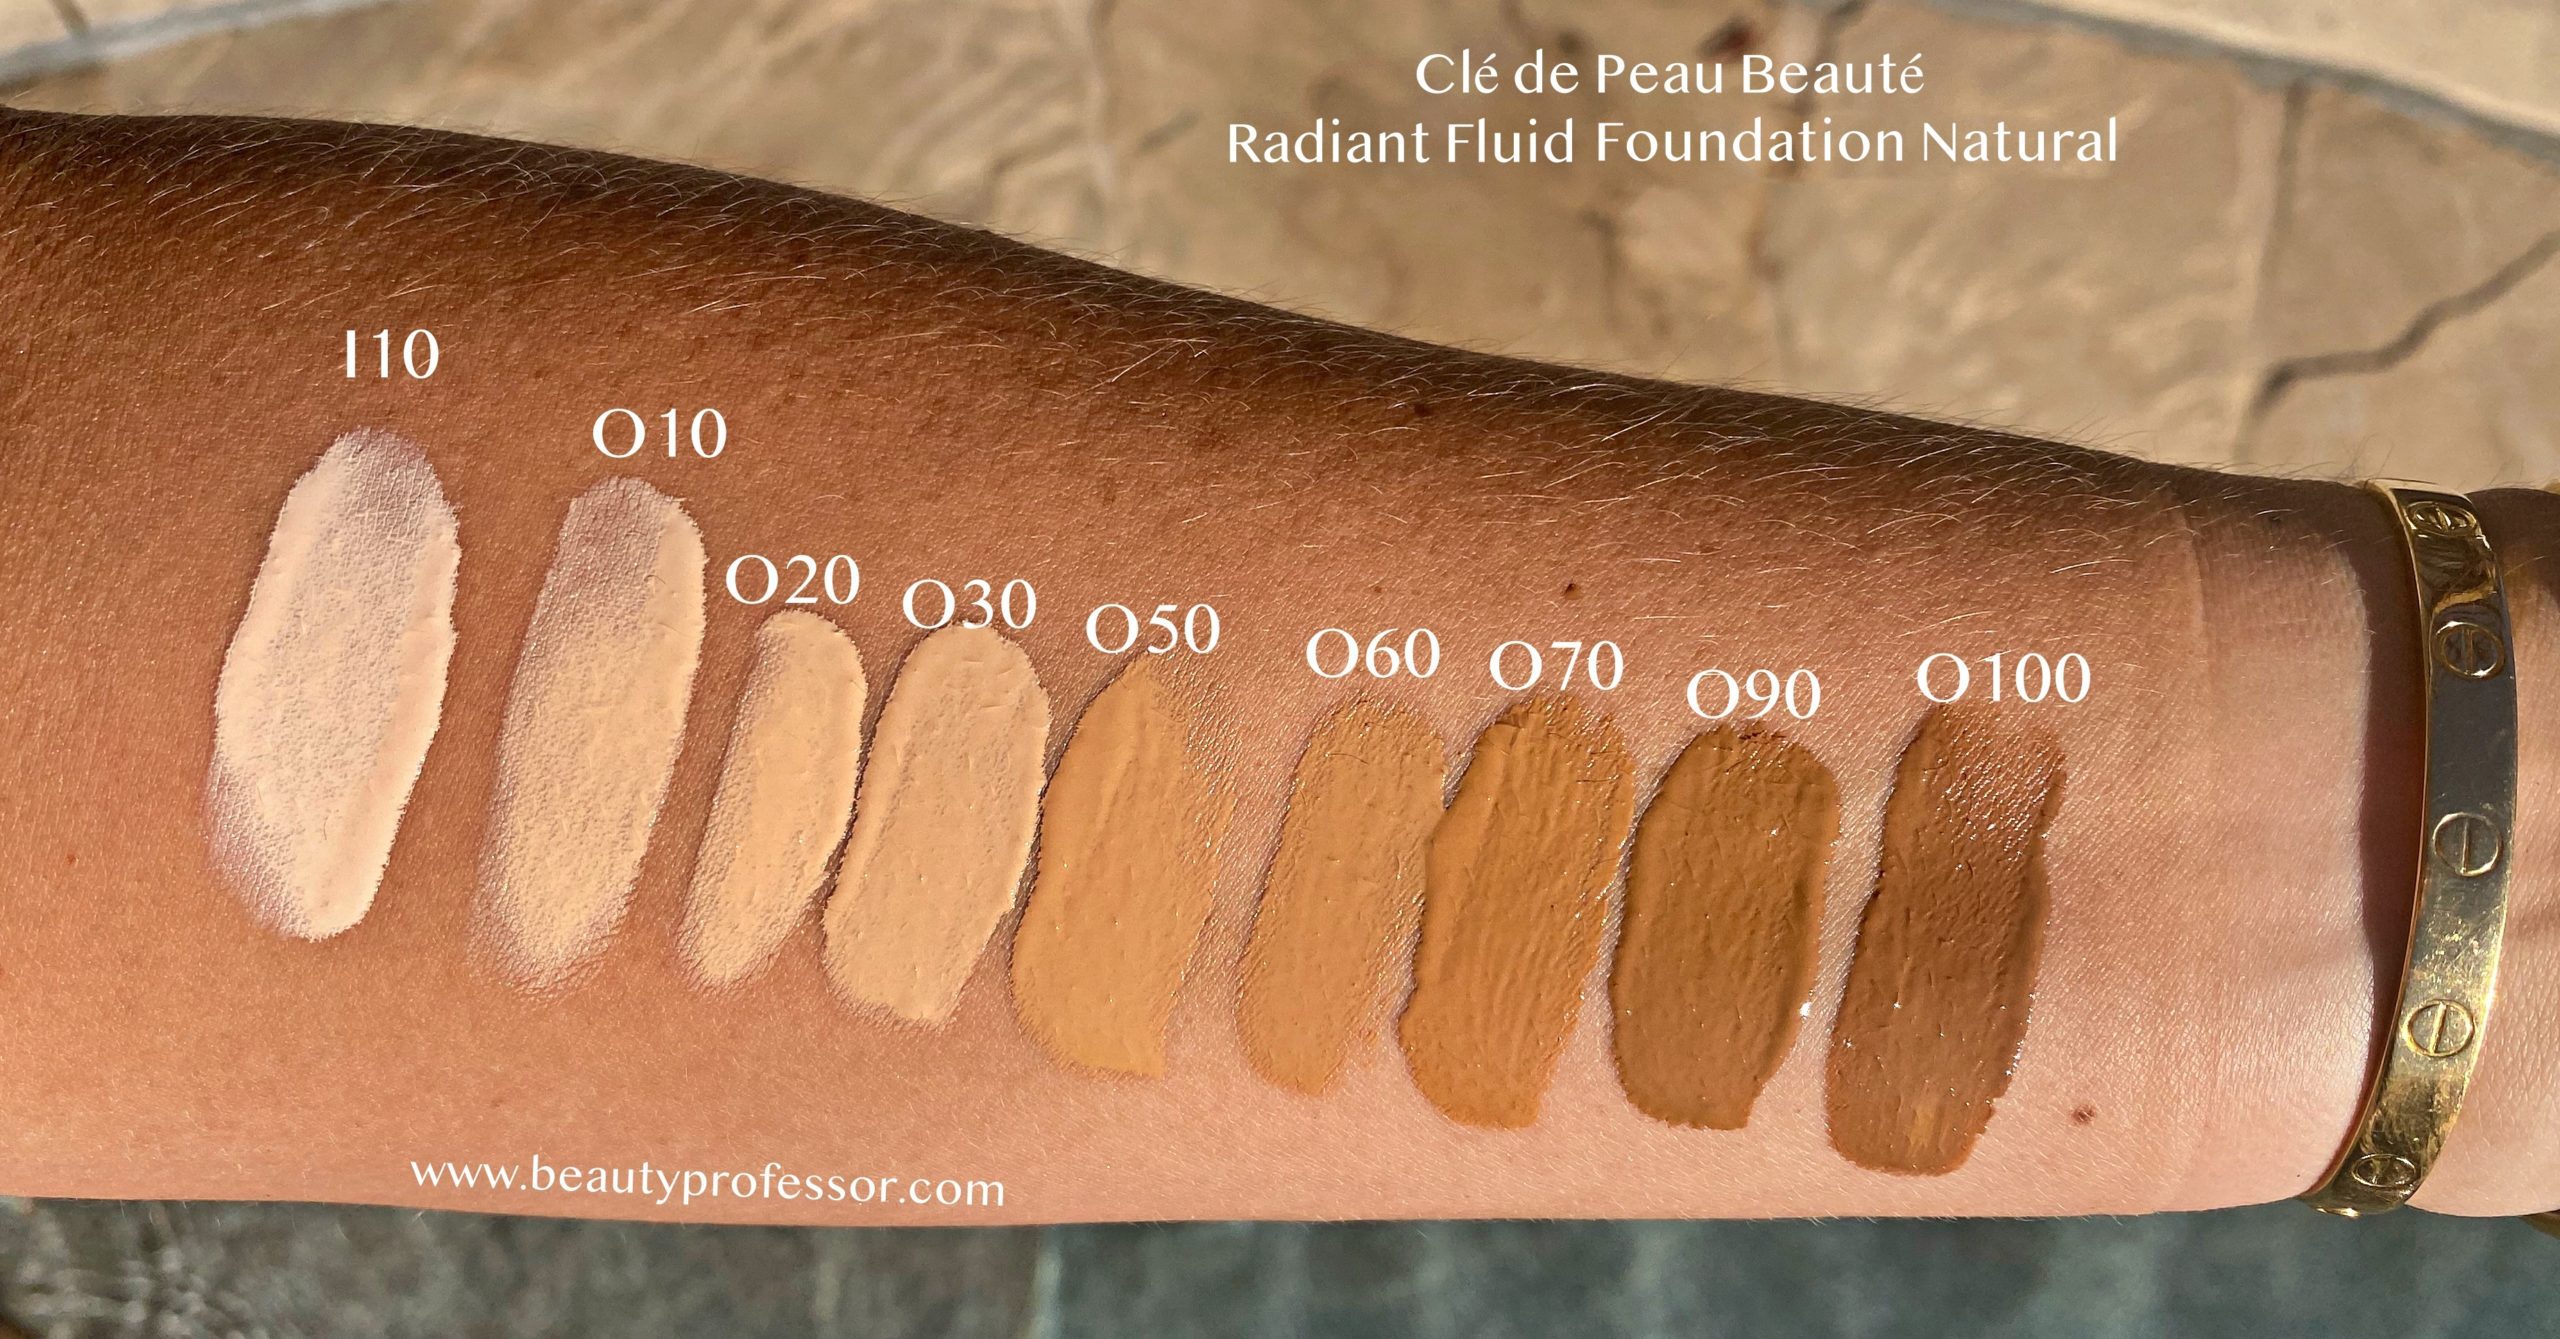 cle de peau radiant fluid foundation natural swatches on an arm